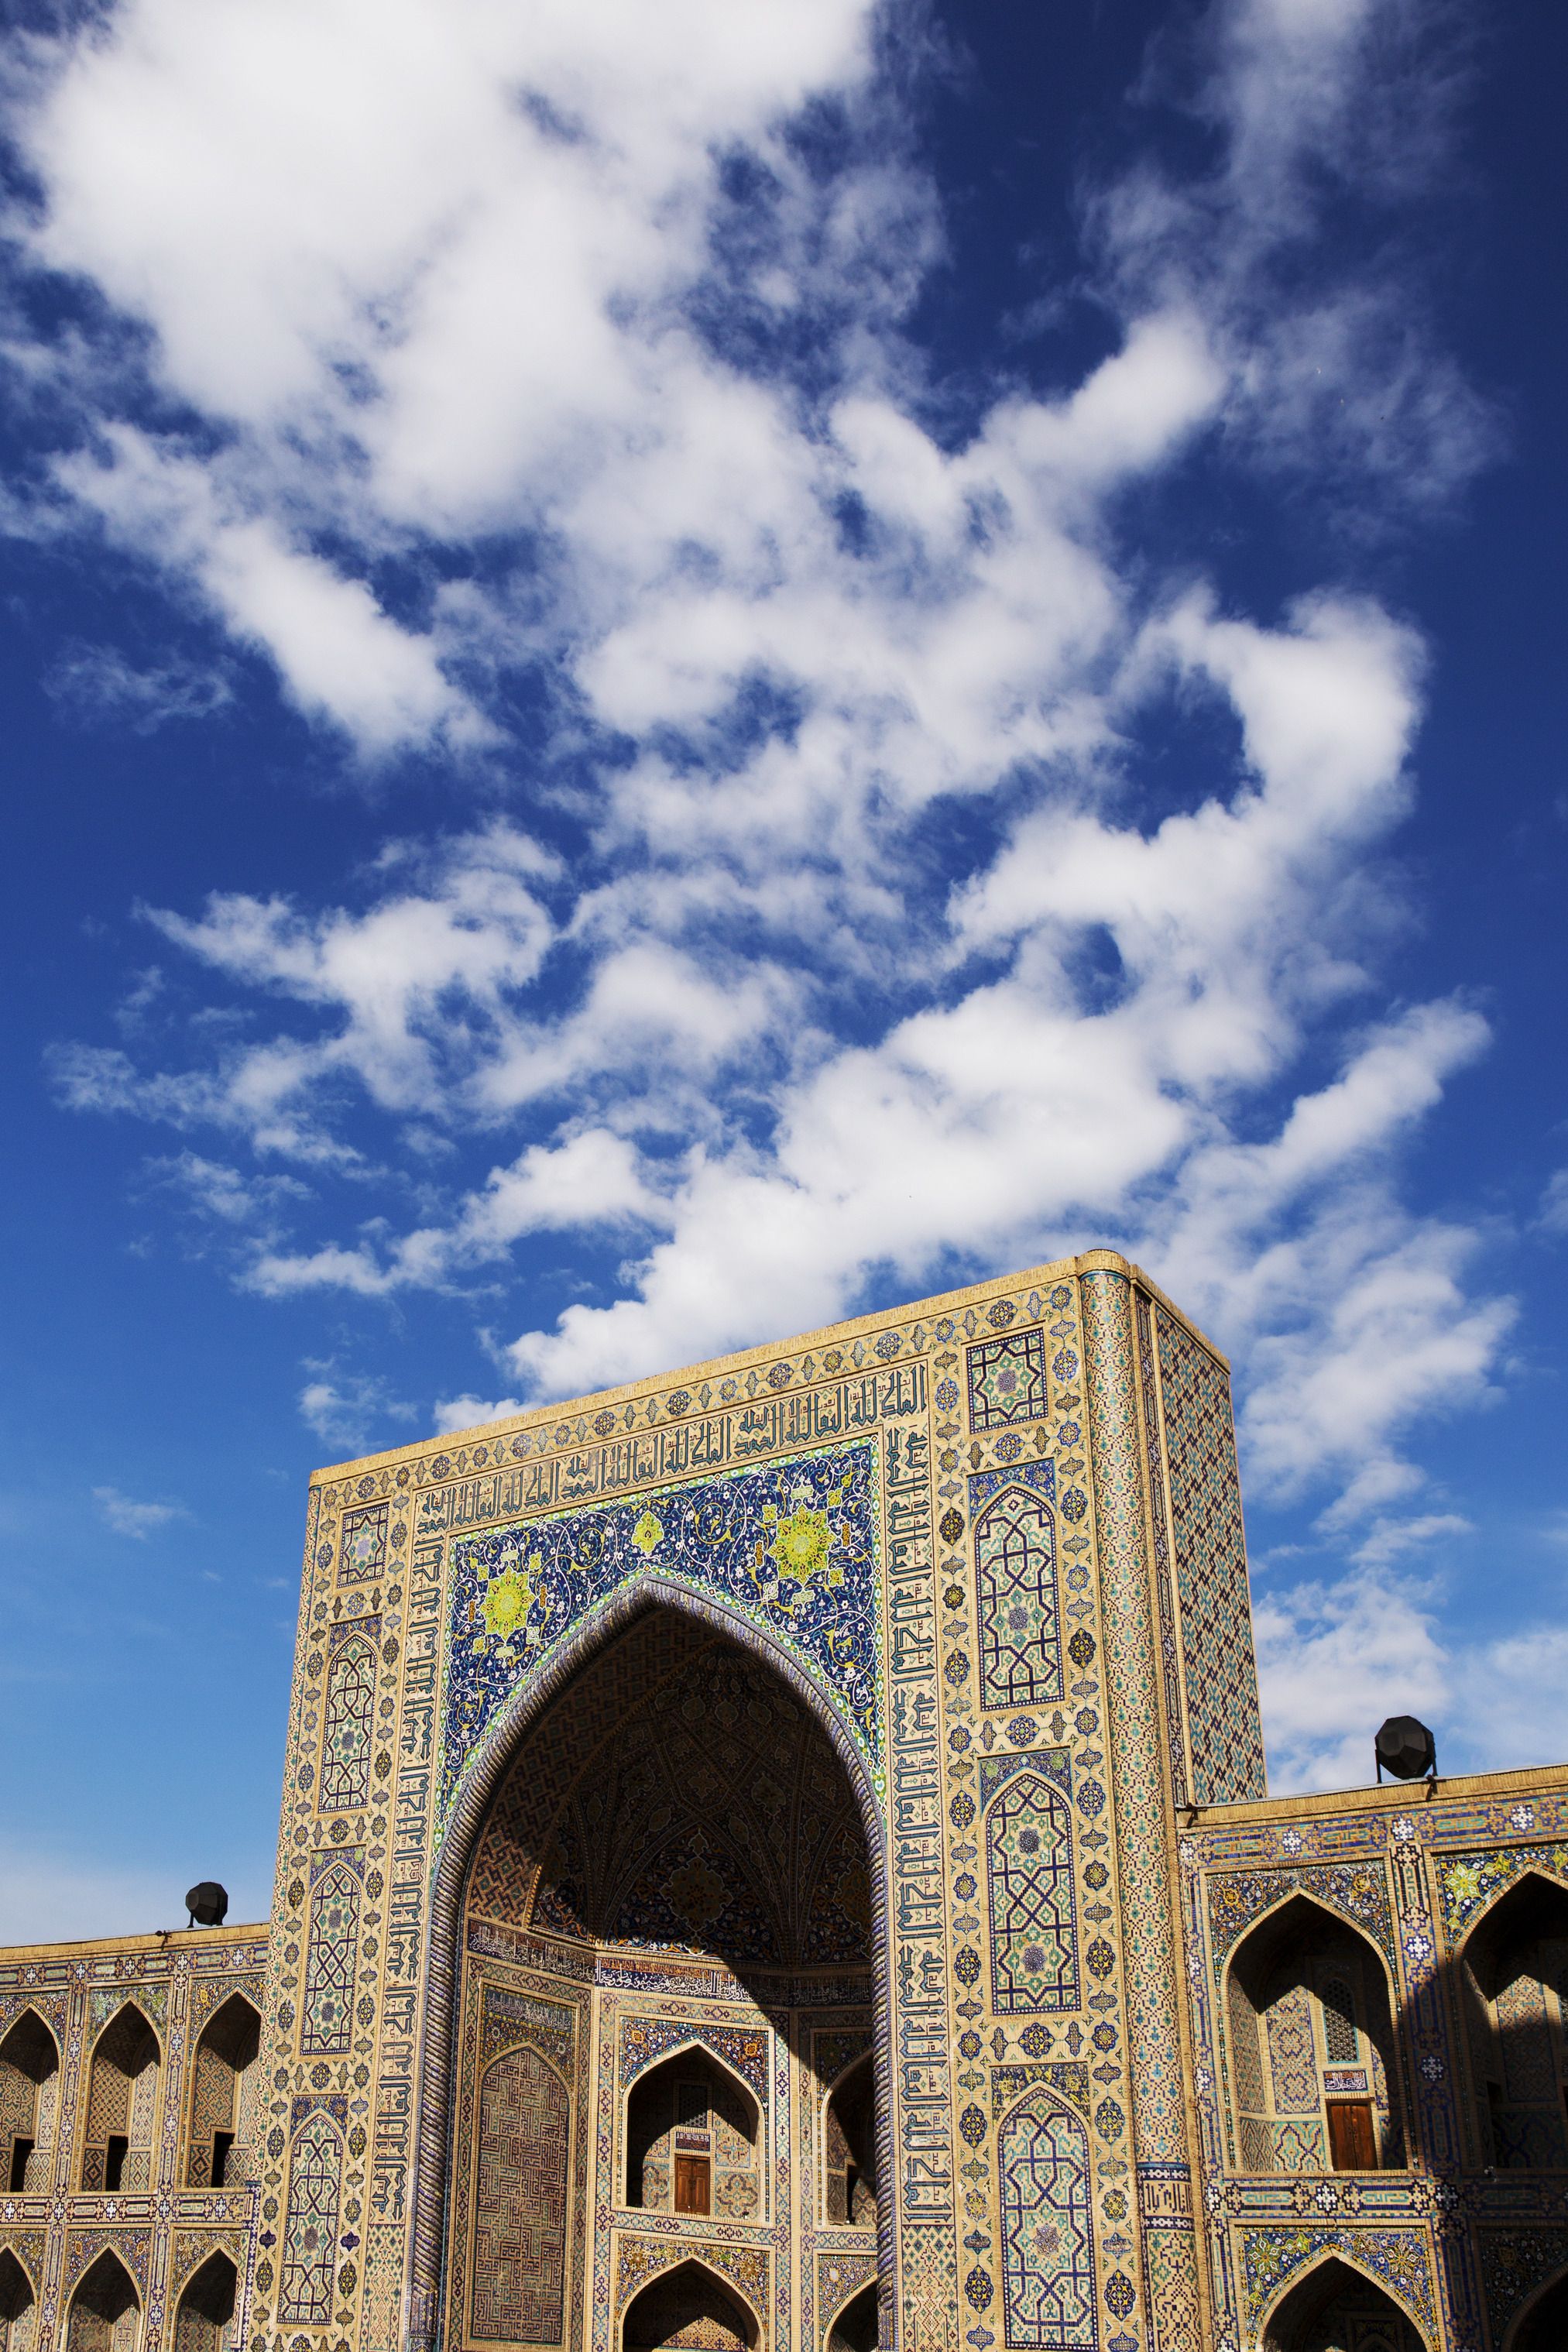 a blue and tan colored exterior of a building with intricate tilework against a vivid blue sky